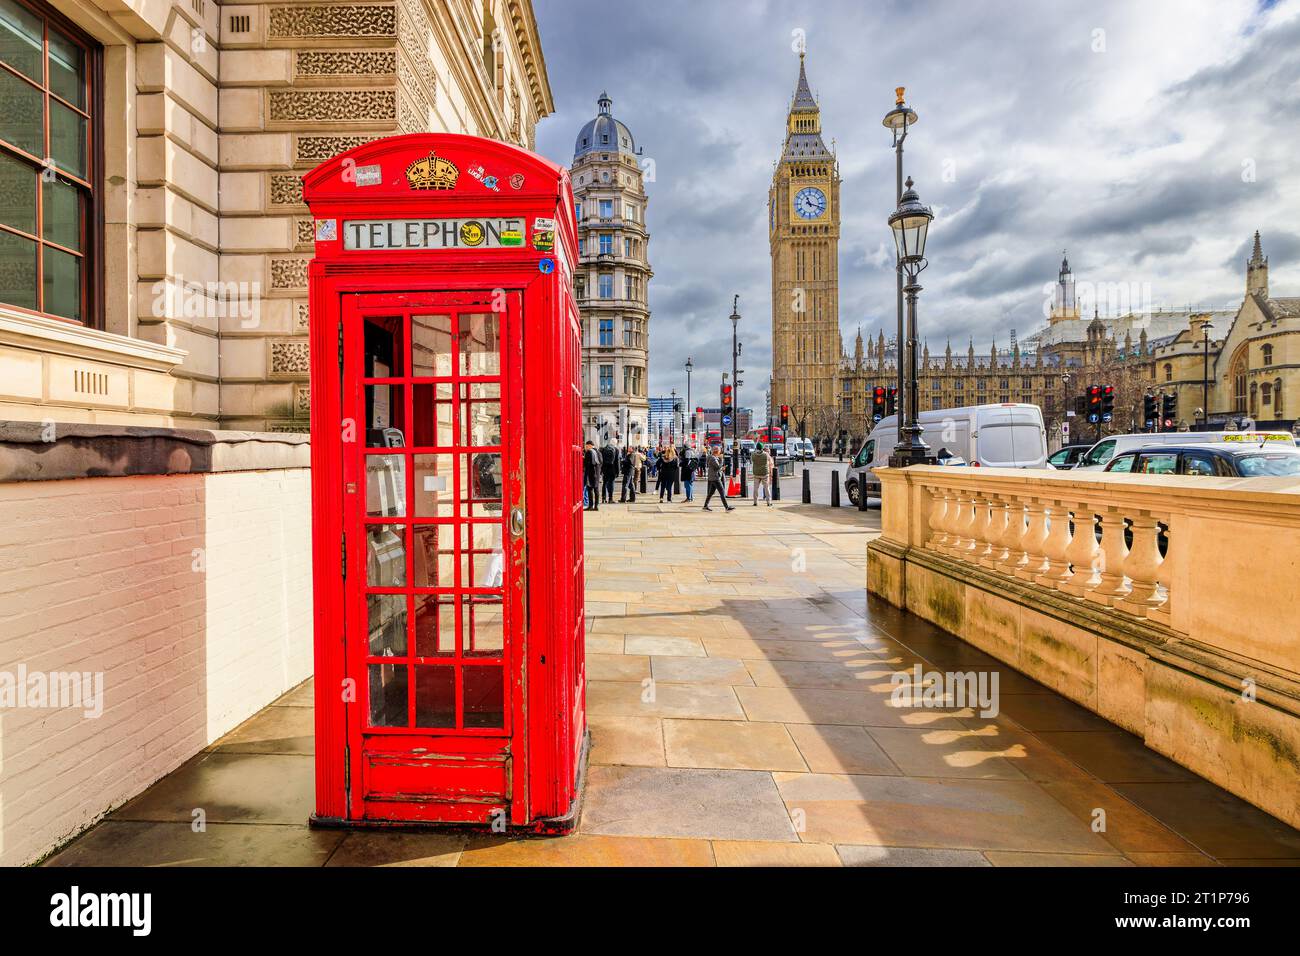 London, England, UK - March 14, 2023: The red telephone booth and Big Ben Clock Tower in the background. Stock Photo